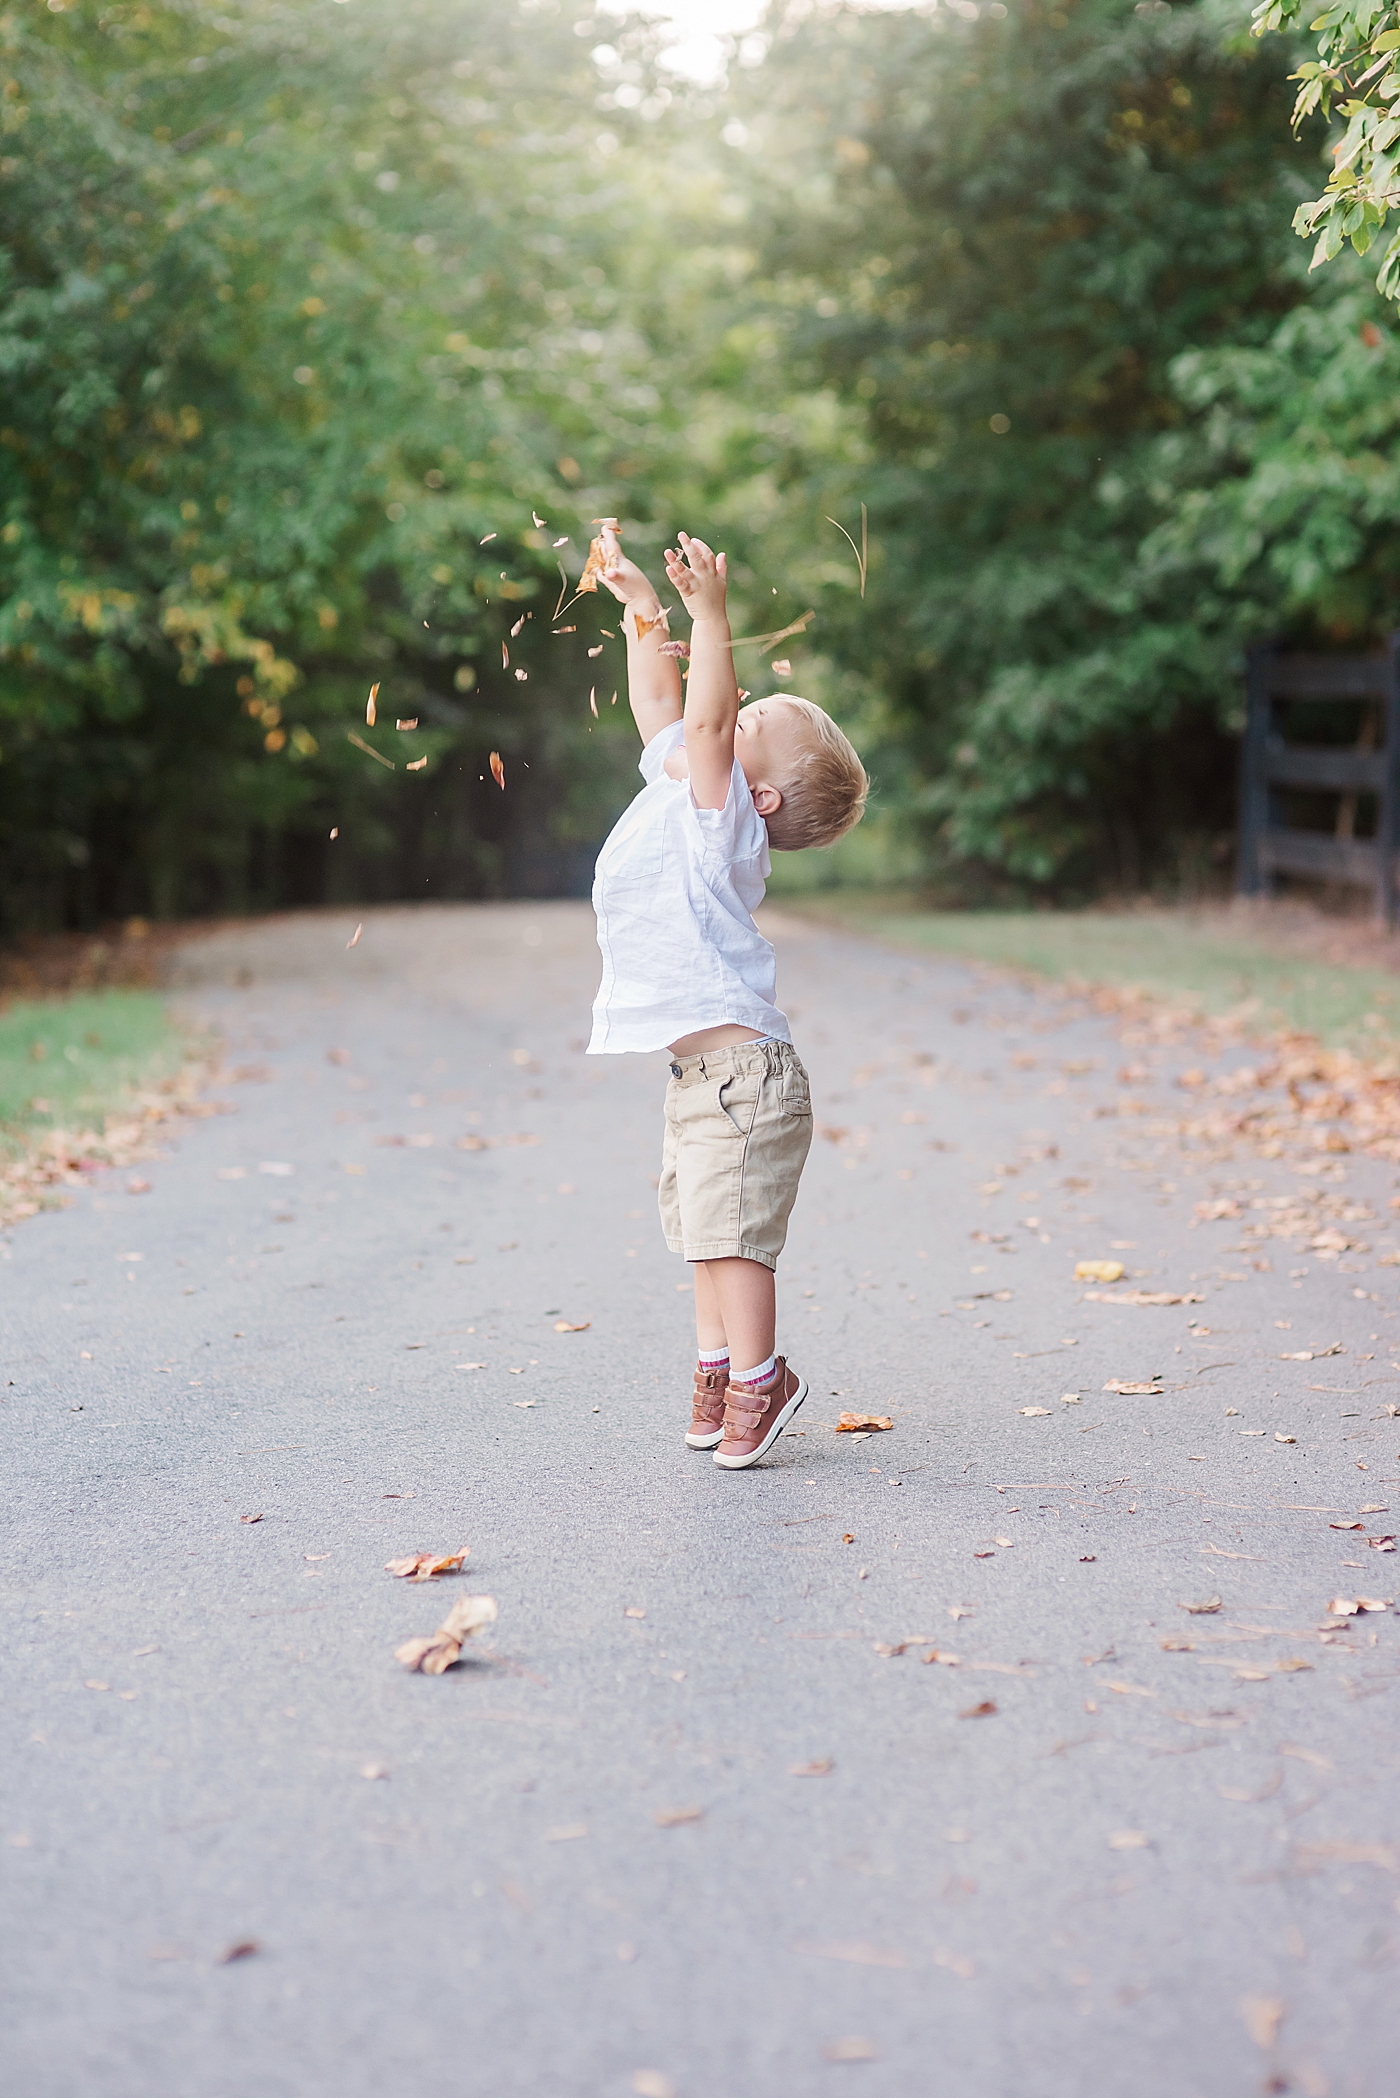 Little boy throwing leaves on a path | Photo by Anna Wisjo